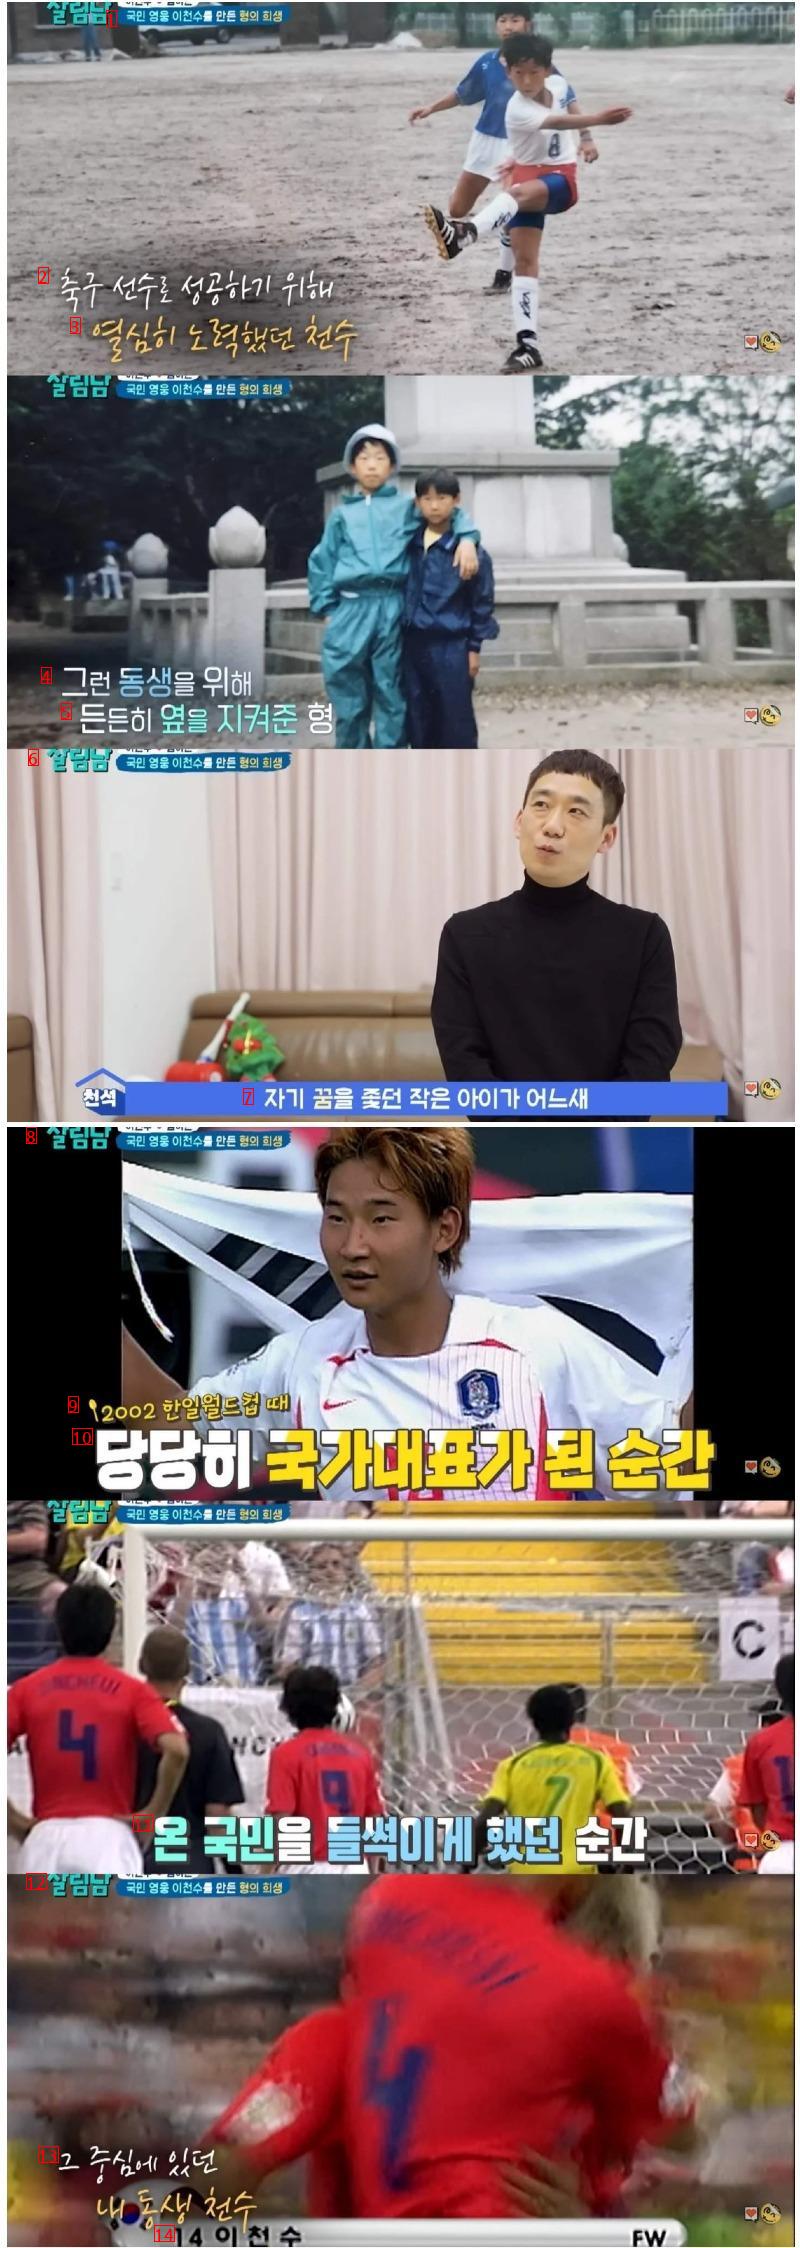 Lee Chun-soo became a famous soccer player because of his brother